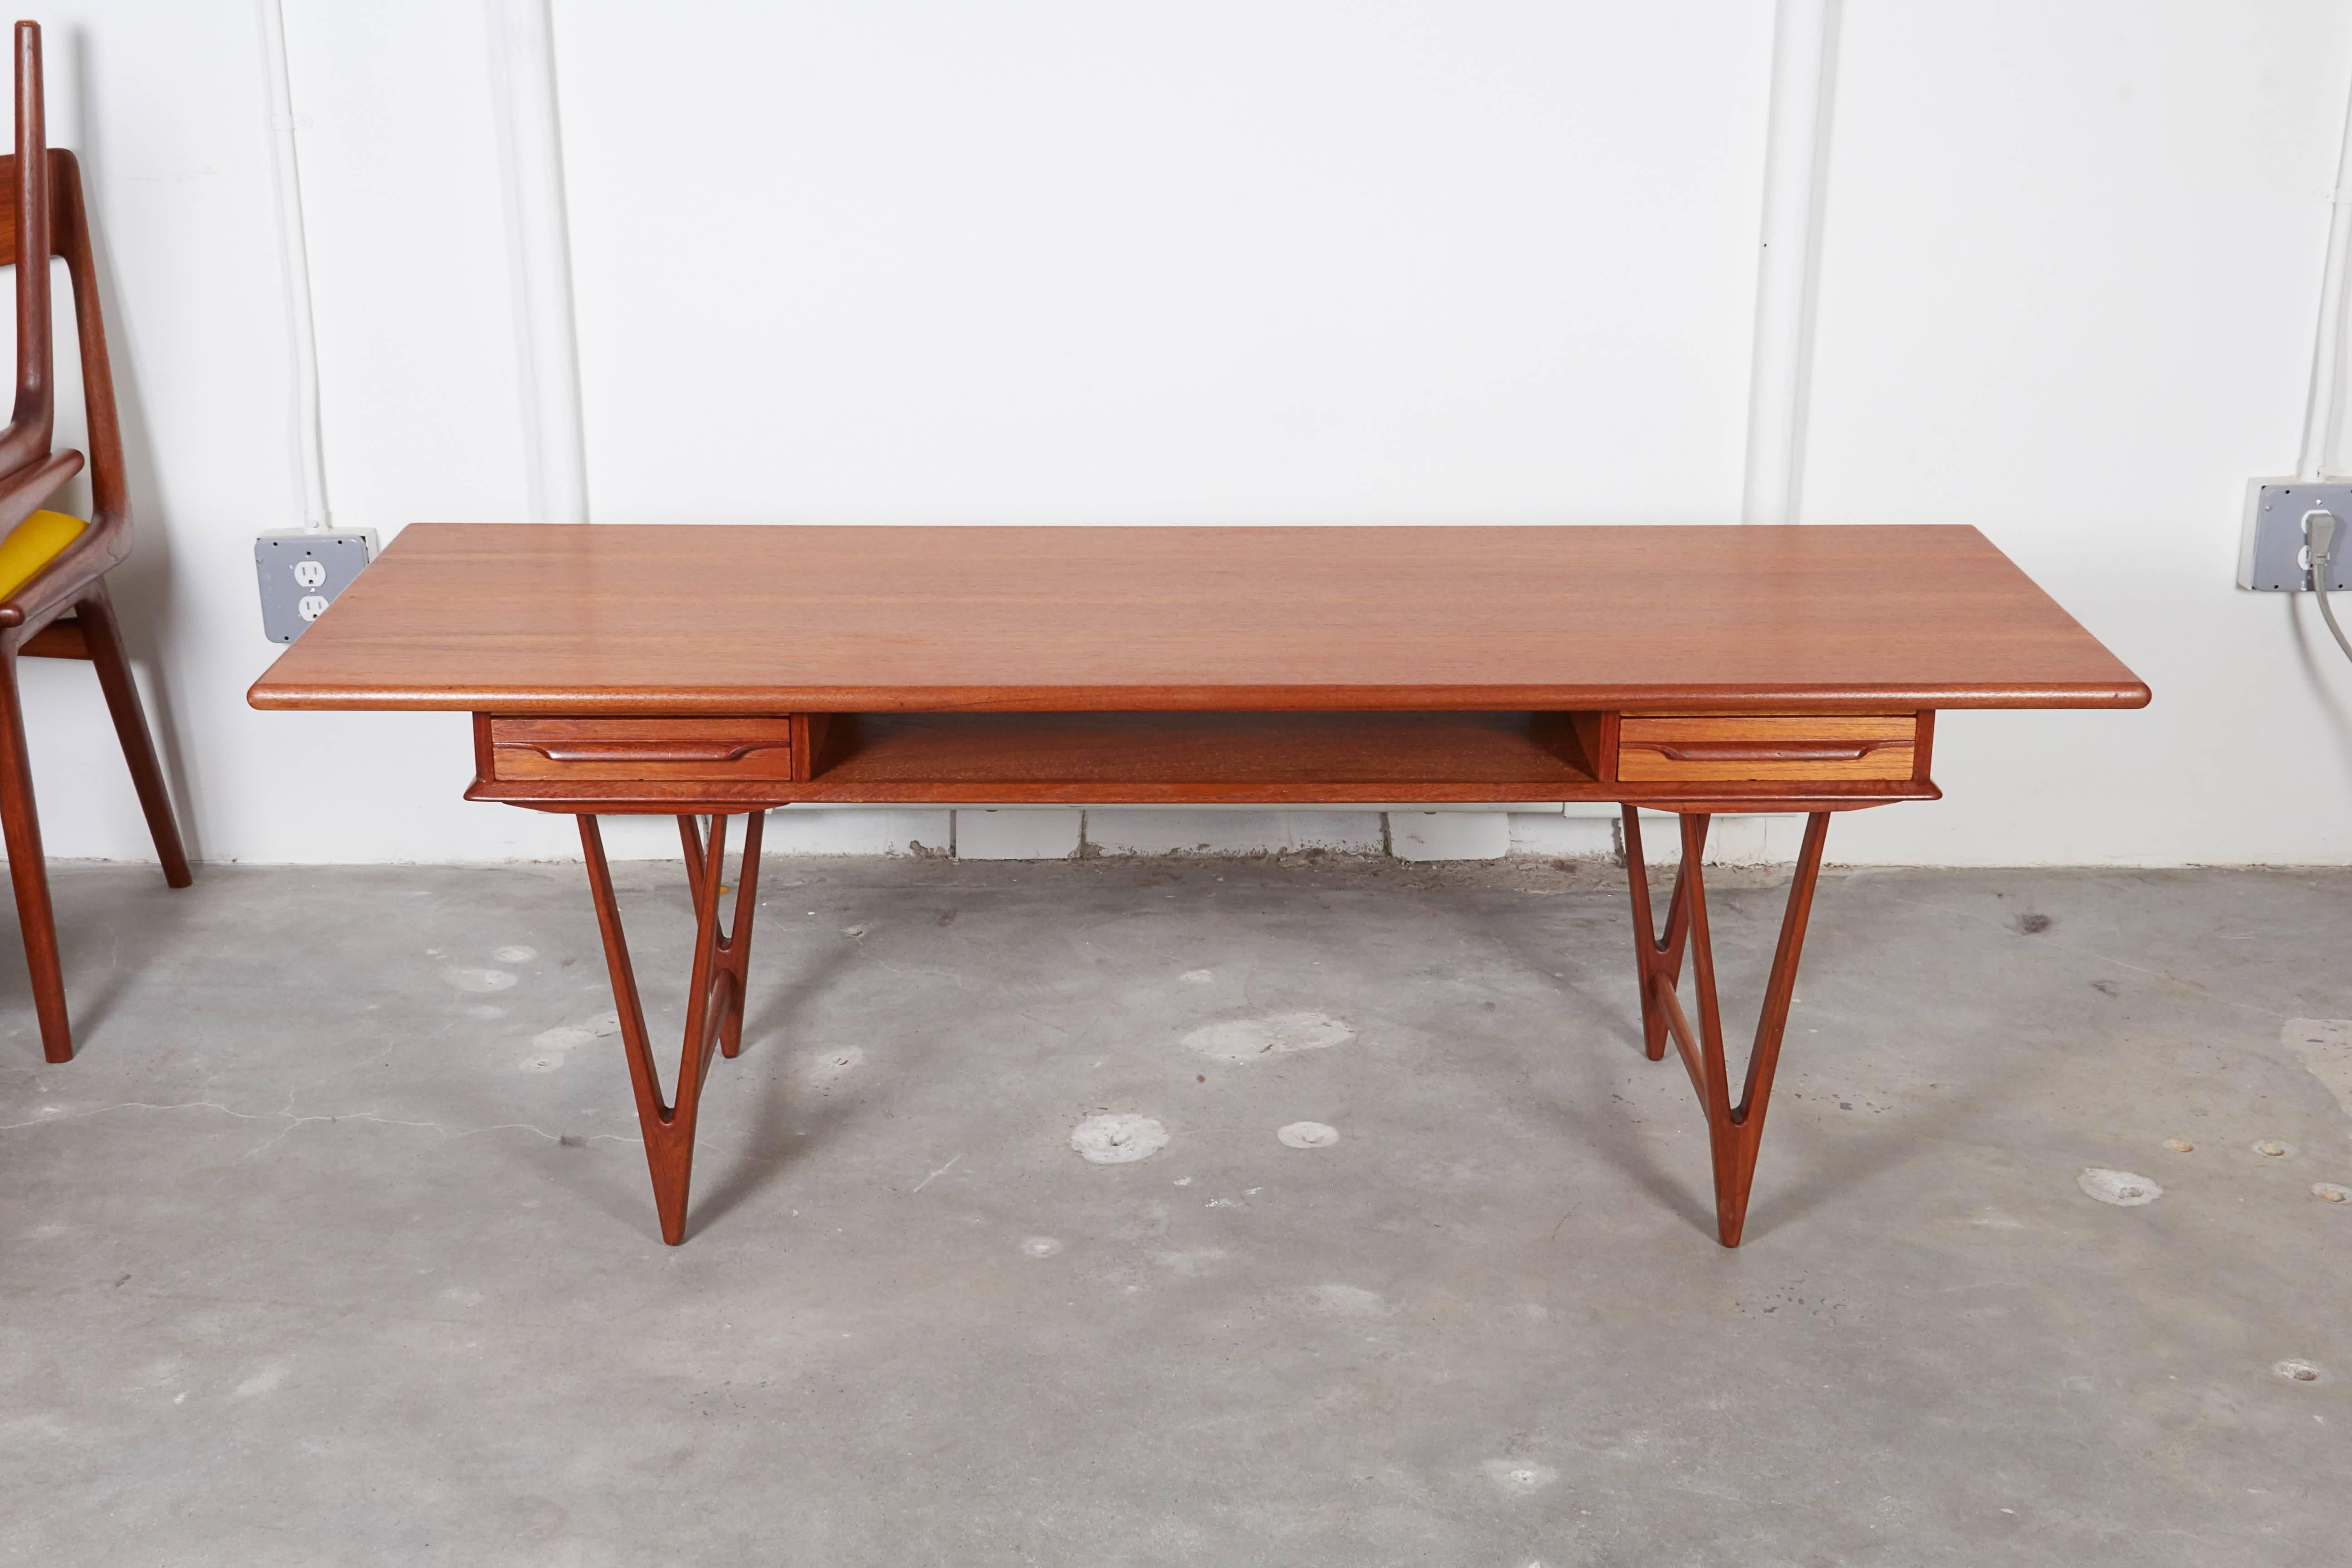 Vintage 1950s E.W. Bach Coffee Table

This Danish coffee table is a sculptural masterpieces. Shelves and drawers that open to both sides makes the perfect coffee table. Ready for pick up, delivery, or shipping anywhere in the world. 